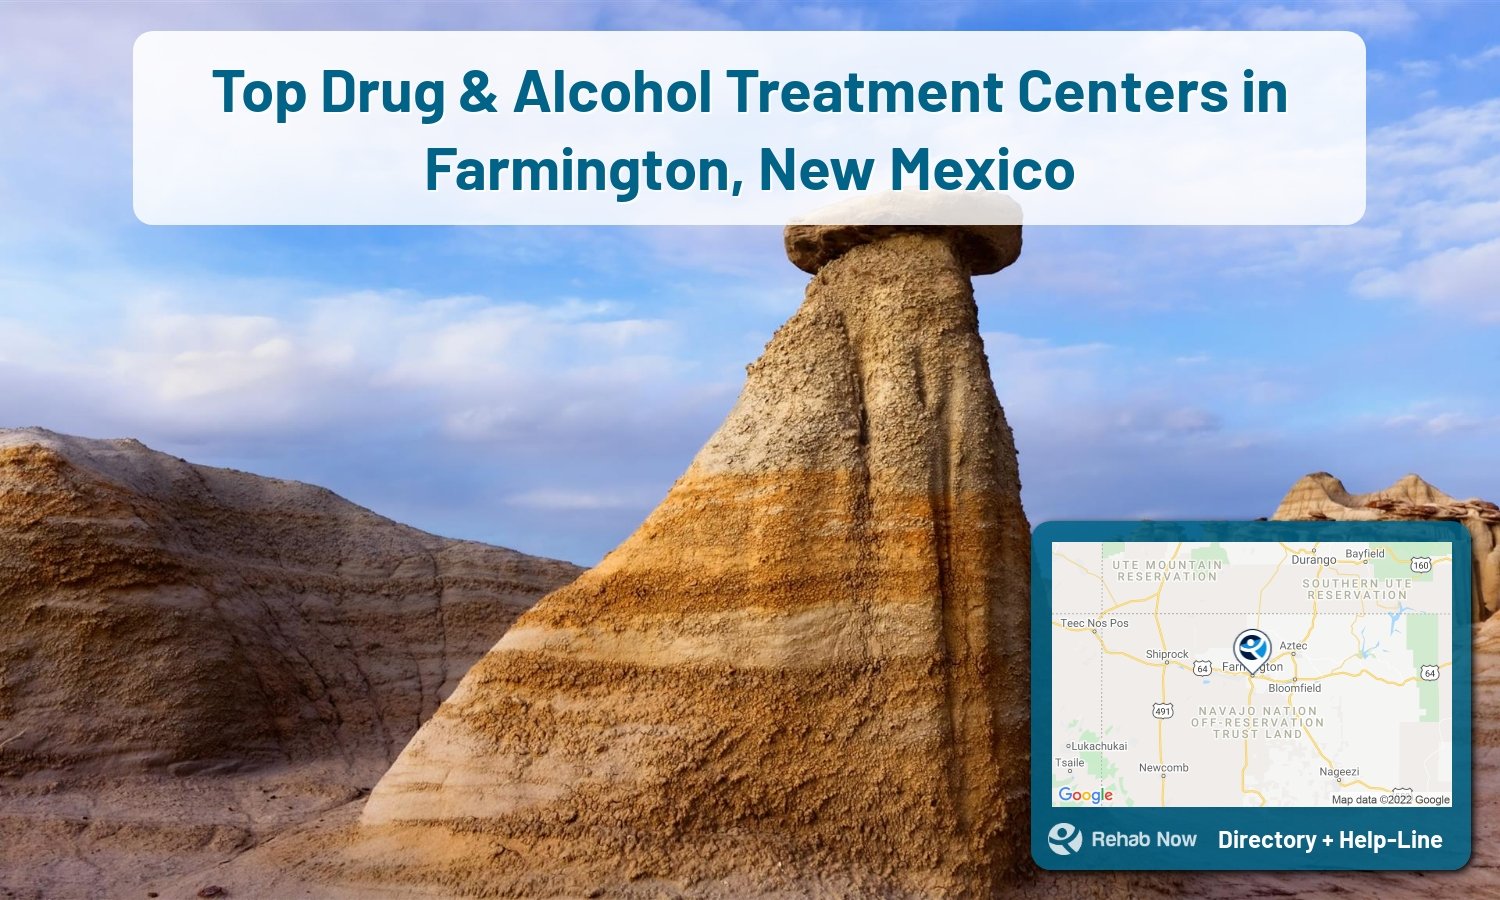 Ready to pick a rehab center in Farmington? Get off alcohol, opiates, and other drugs, by selecting top drug rehab centers in New Mexico